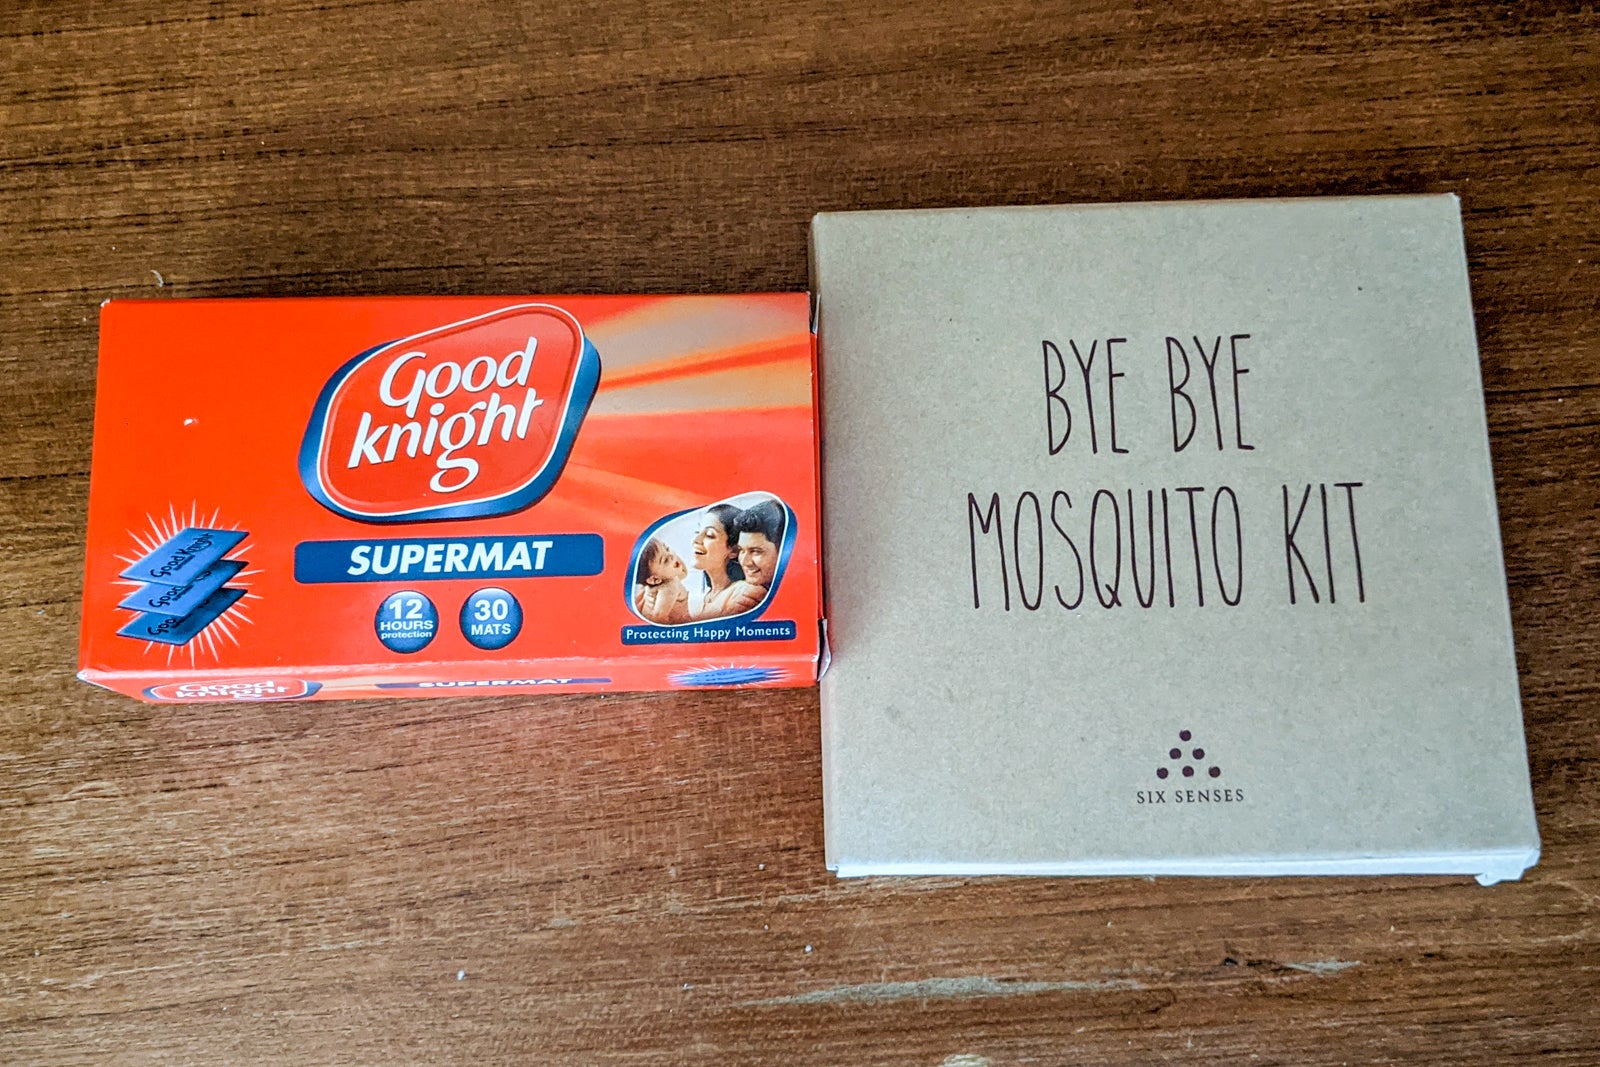 Mosquito kit from one of the closets